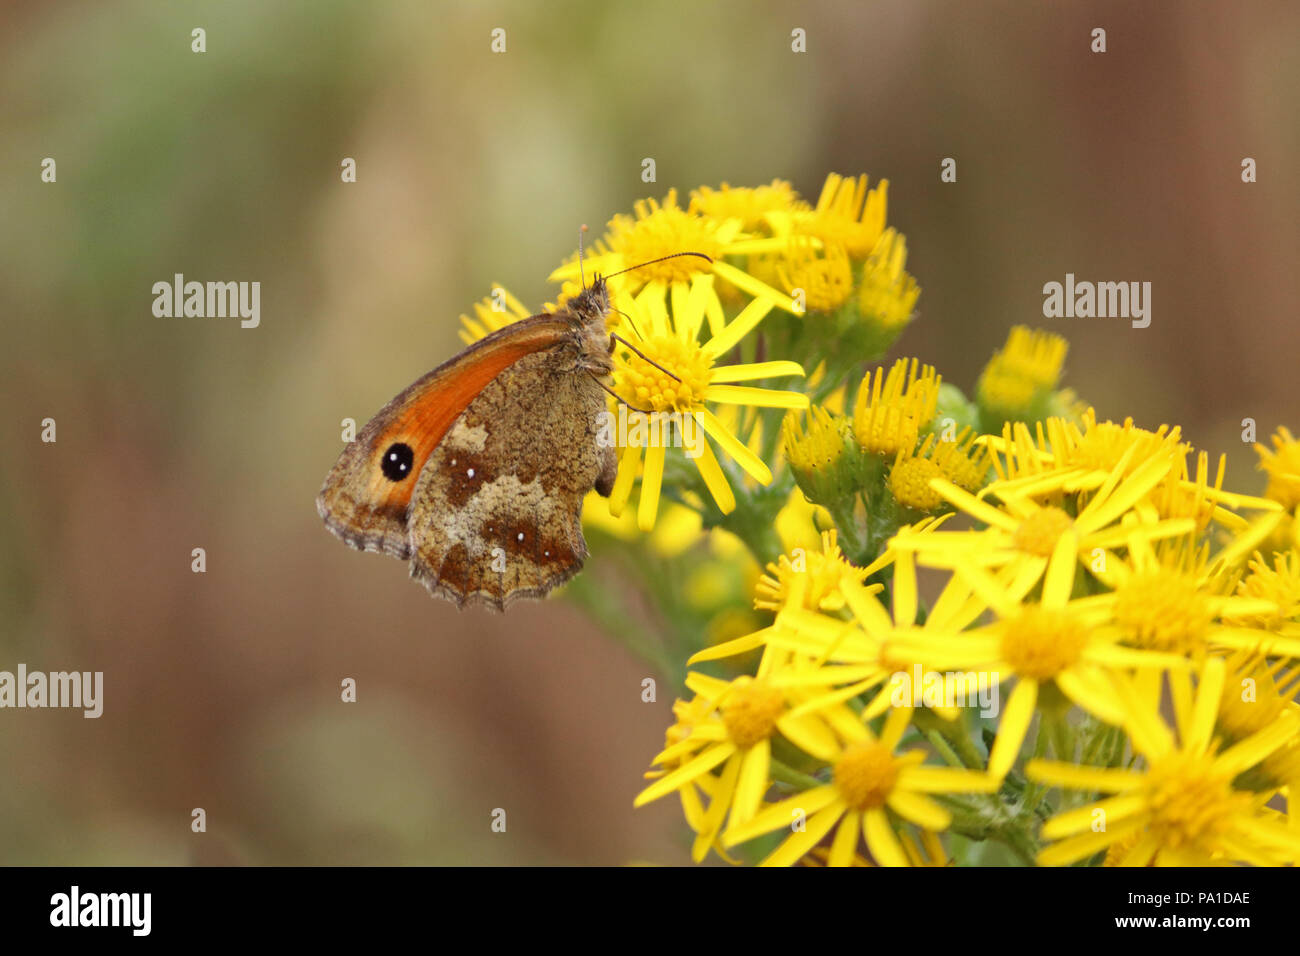 Richmond Park London UK. 20th July 2018. The first day of the big butterfly count with many Gatekeeper butterflies (Pyronia tithonus or Hedge Brown) spotted on flowers in Richmond Park, South West London. The count is on from 20th July to 12th August. Credit: Julia Gavin/Alamy Live News Stock Photo